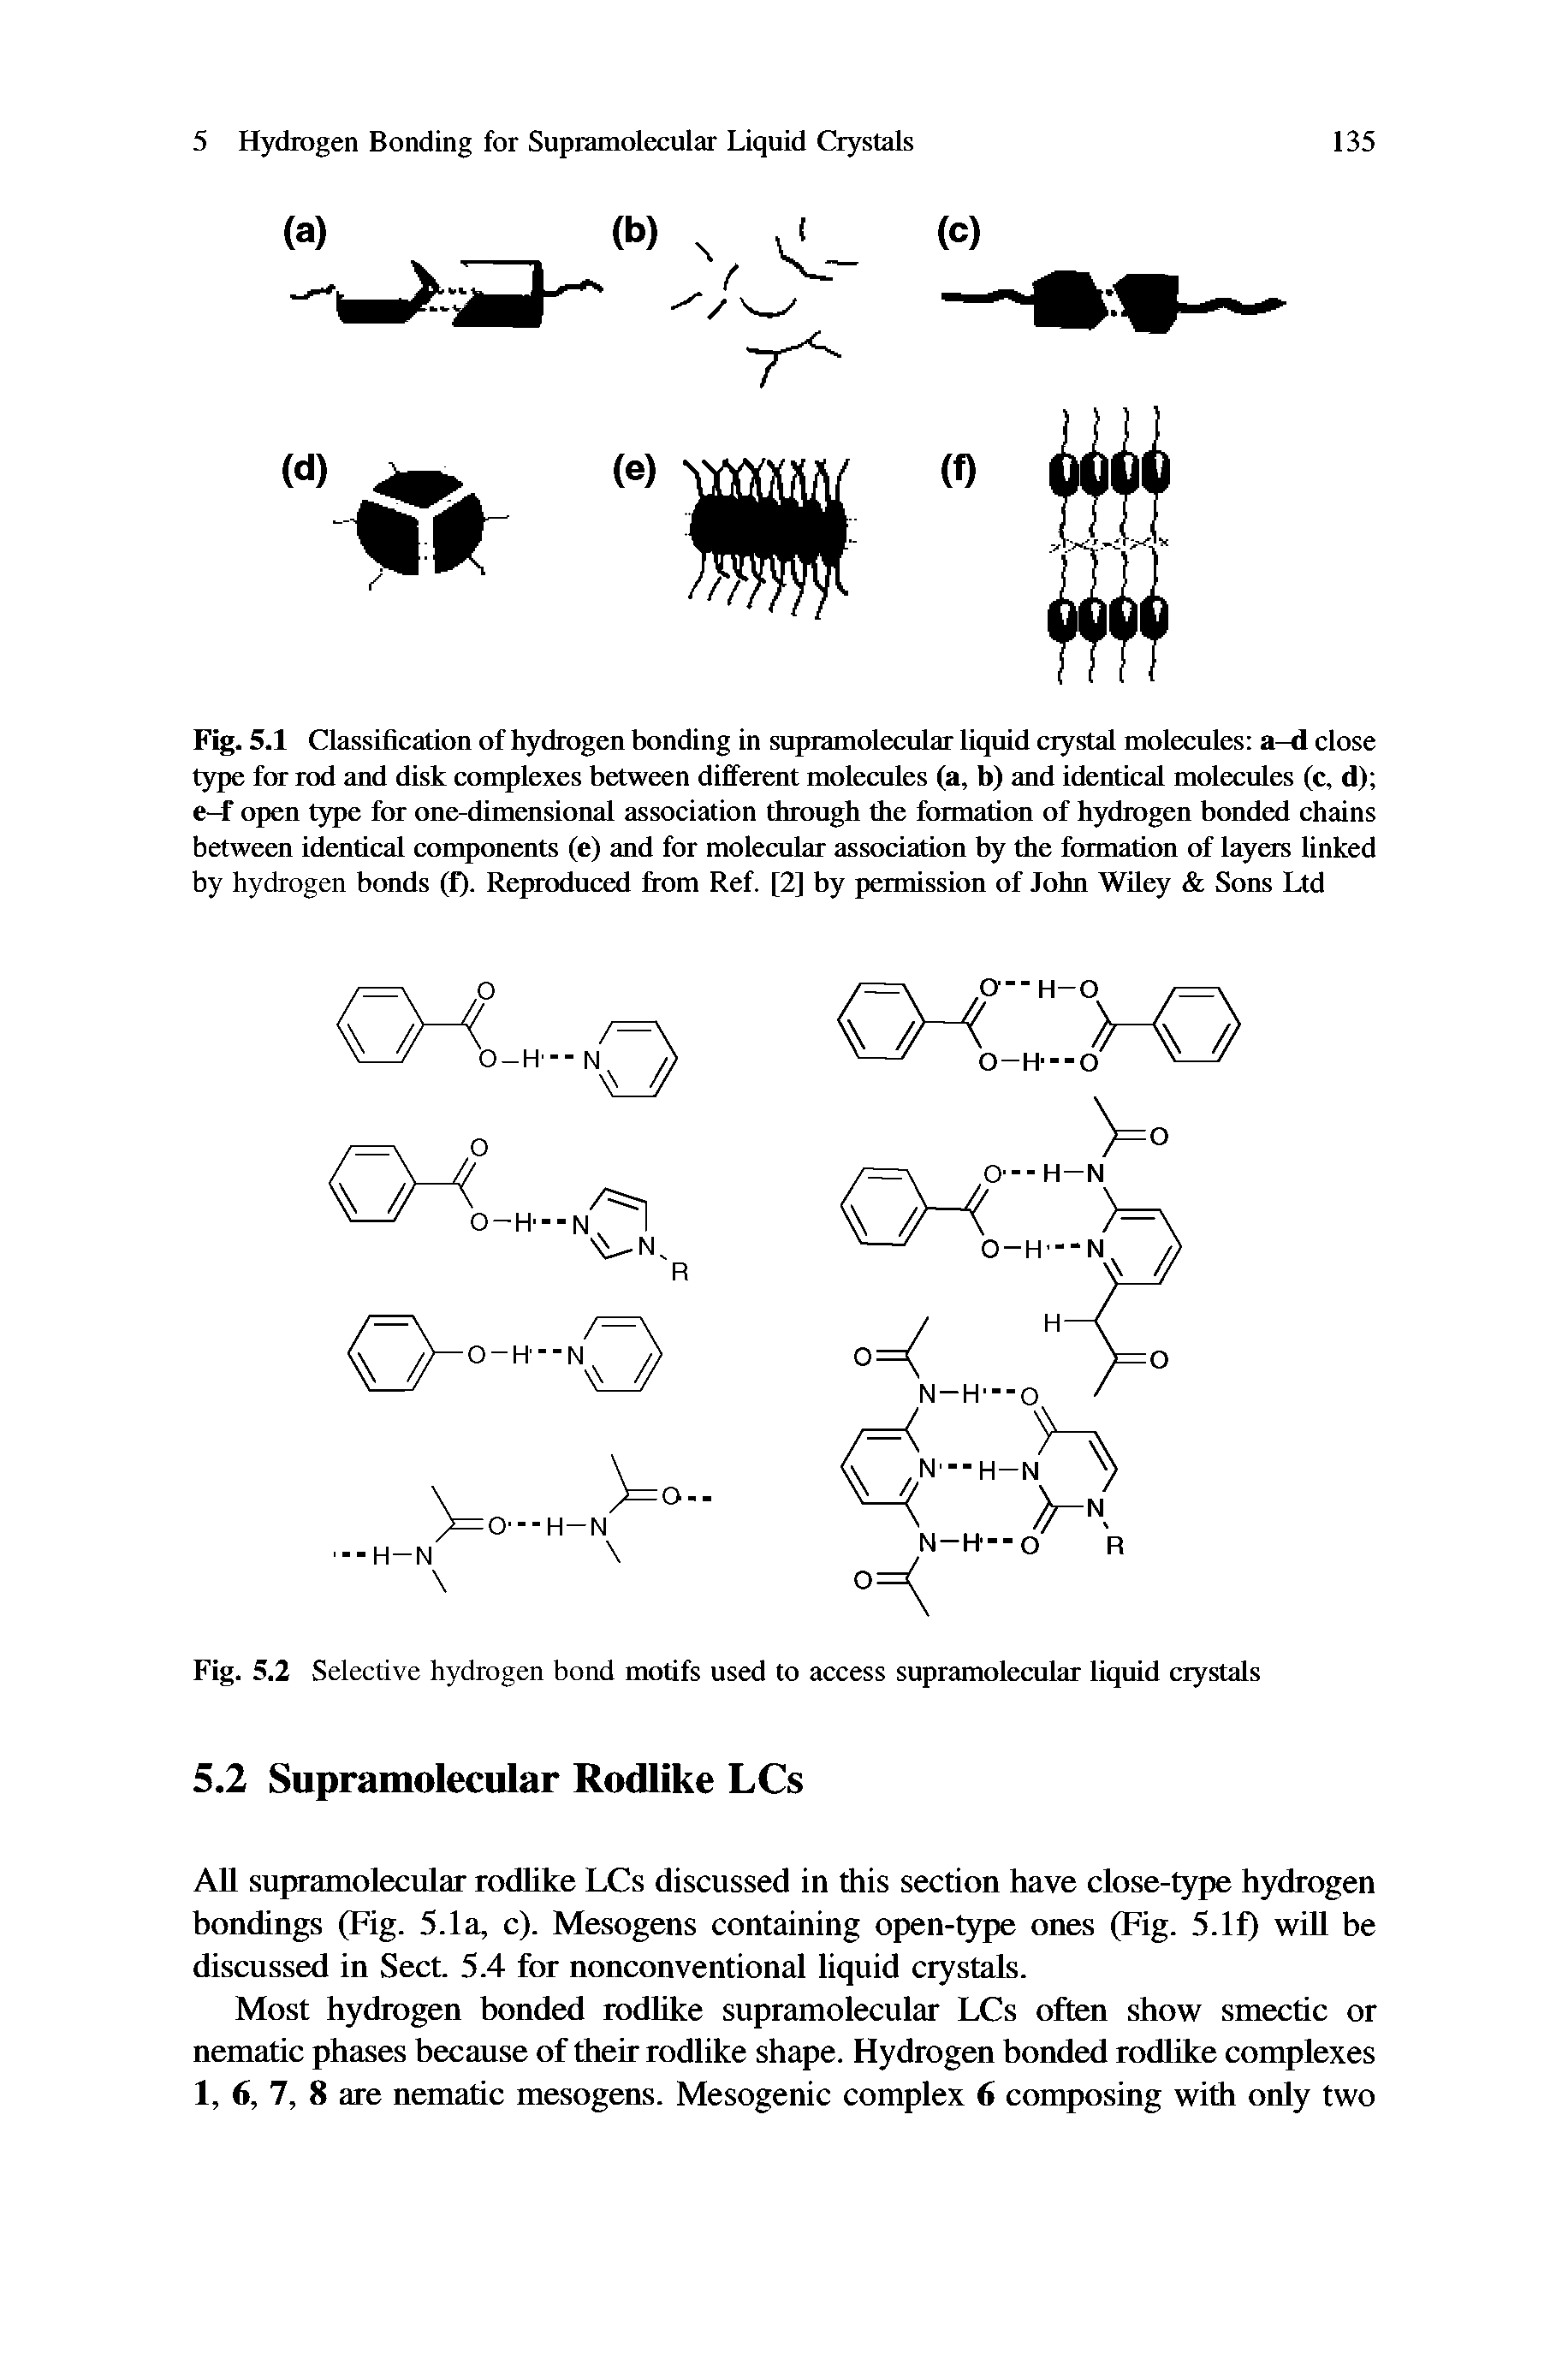 Fig. 5.1 Classification of hydrogen bonding in supramolecular liquid crystal molecules a-d close t)q)e for rod and disk complexes between different molecules (a, b) and identical molecules (c, d) e-f open type for one-dimensional association through the formation of hydrogen bonded chains between identical components (e) and for molecular association by the formation of laytis linked by hydrogen bonds (f). Reproduced from Ref. [2] by permission of John Wiley Sons Ltd...